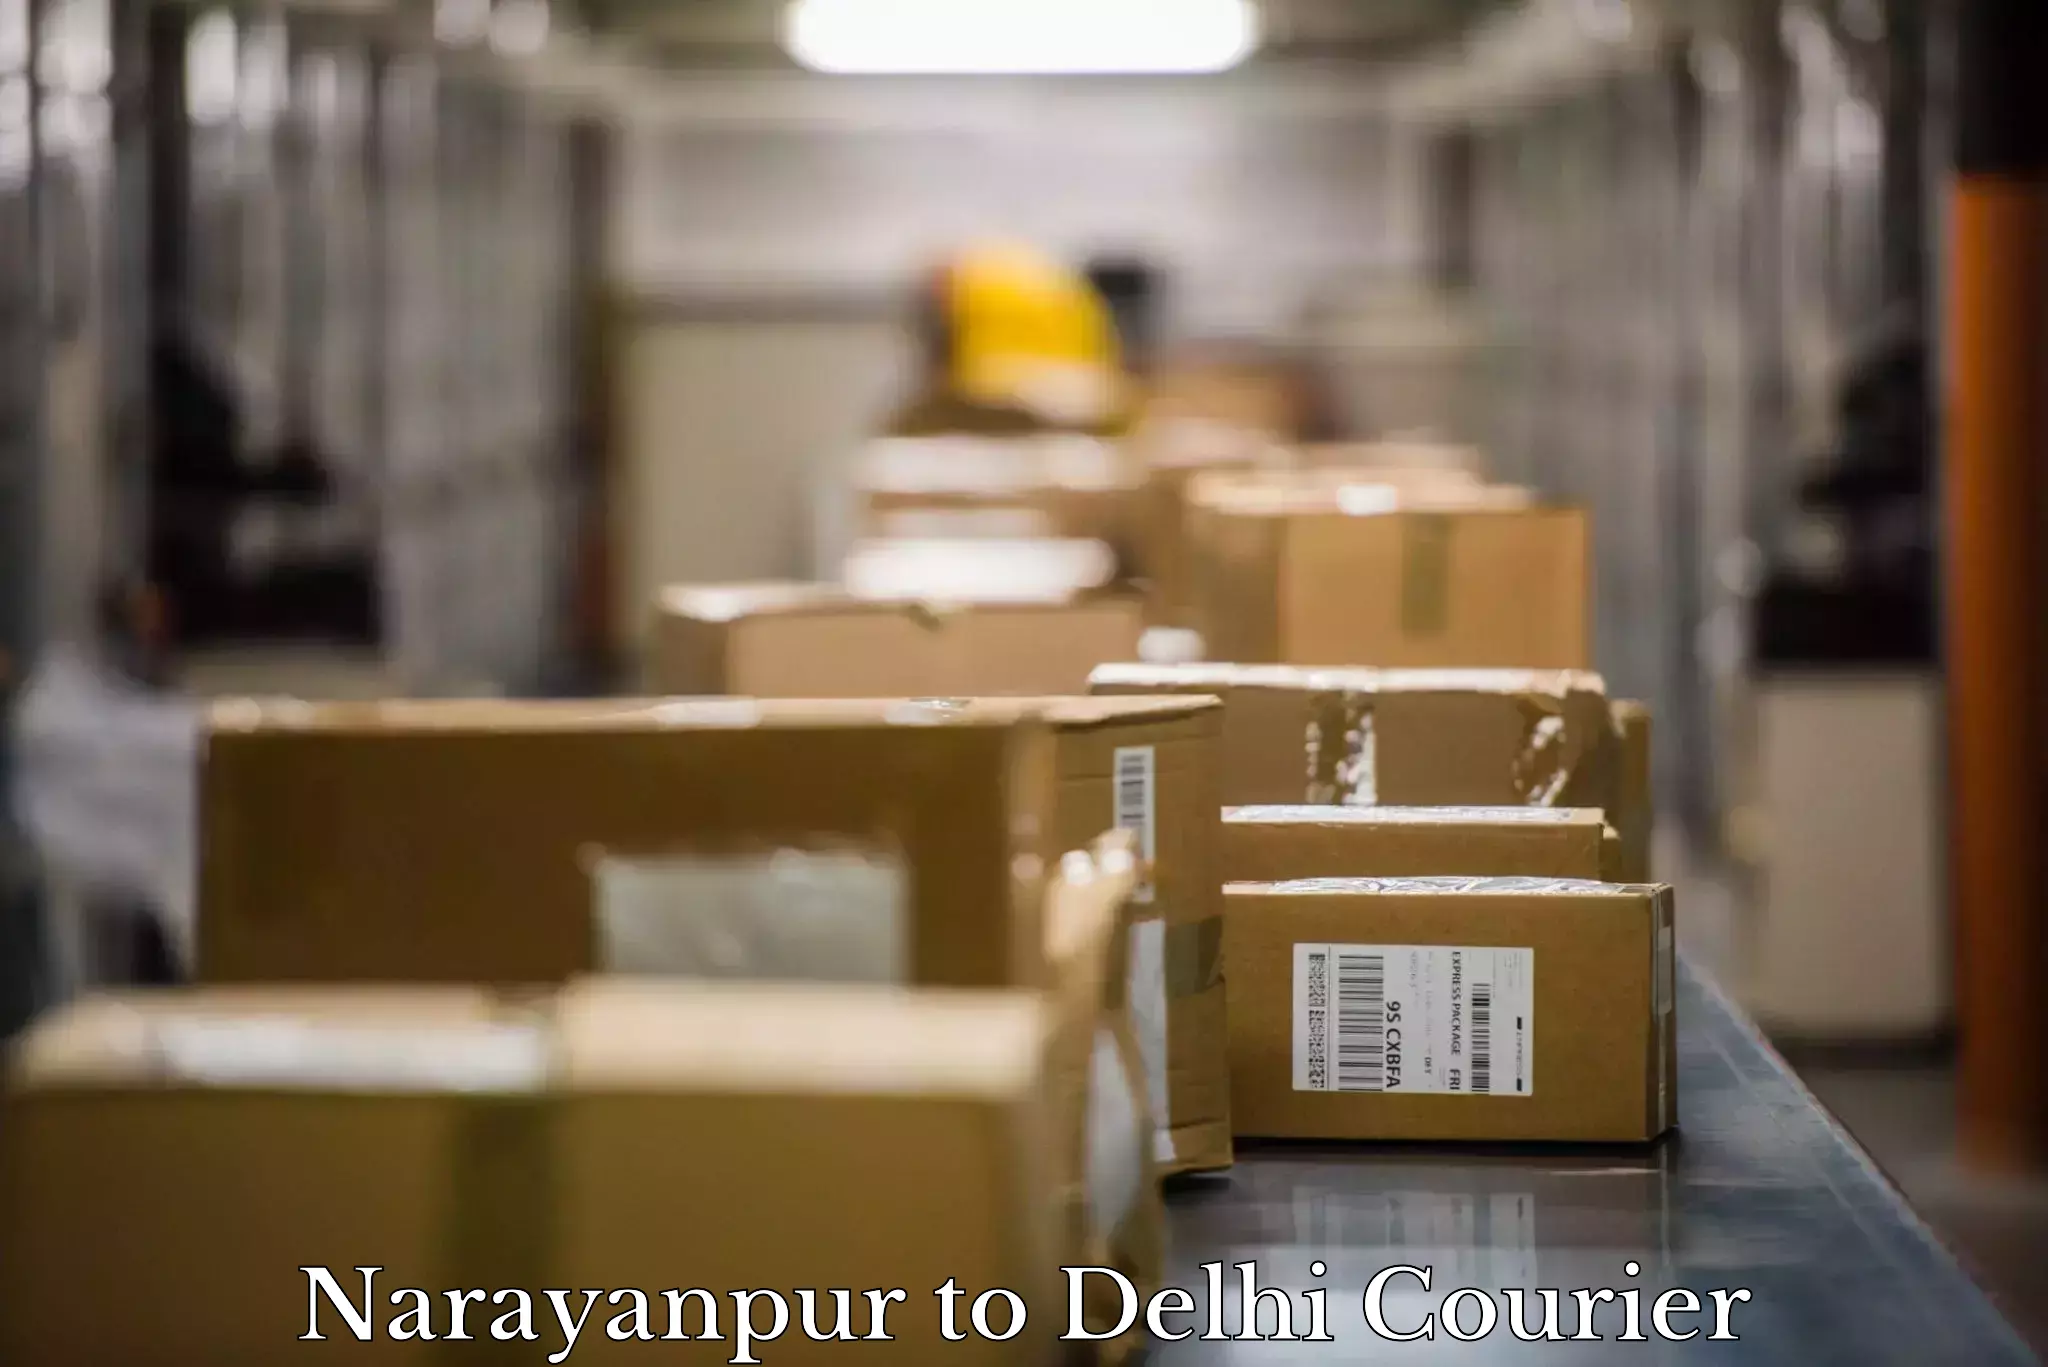 Household goods transport service Narayanpur to University of Delhi